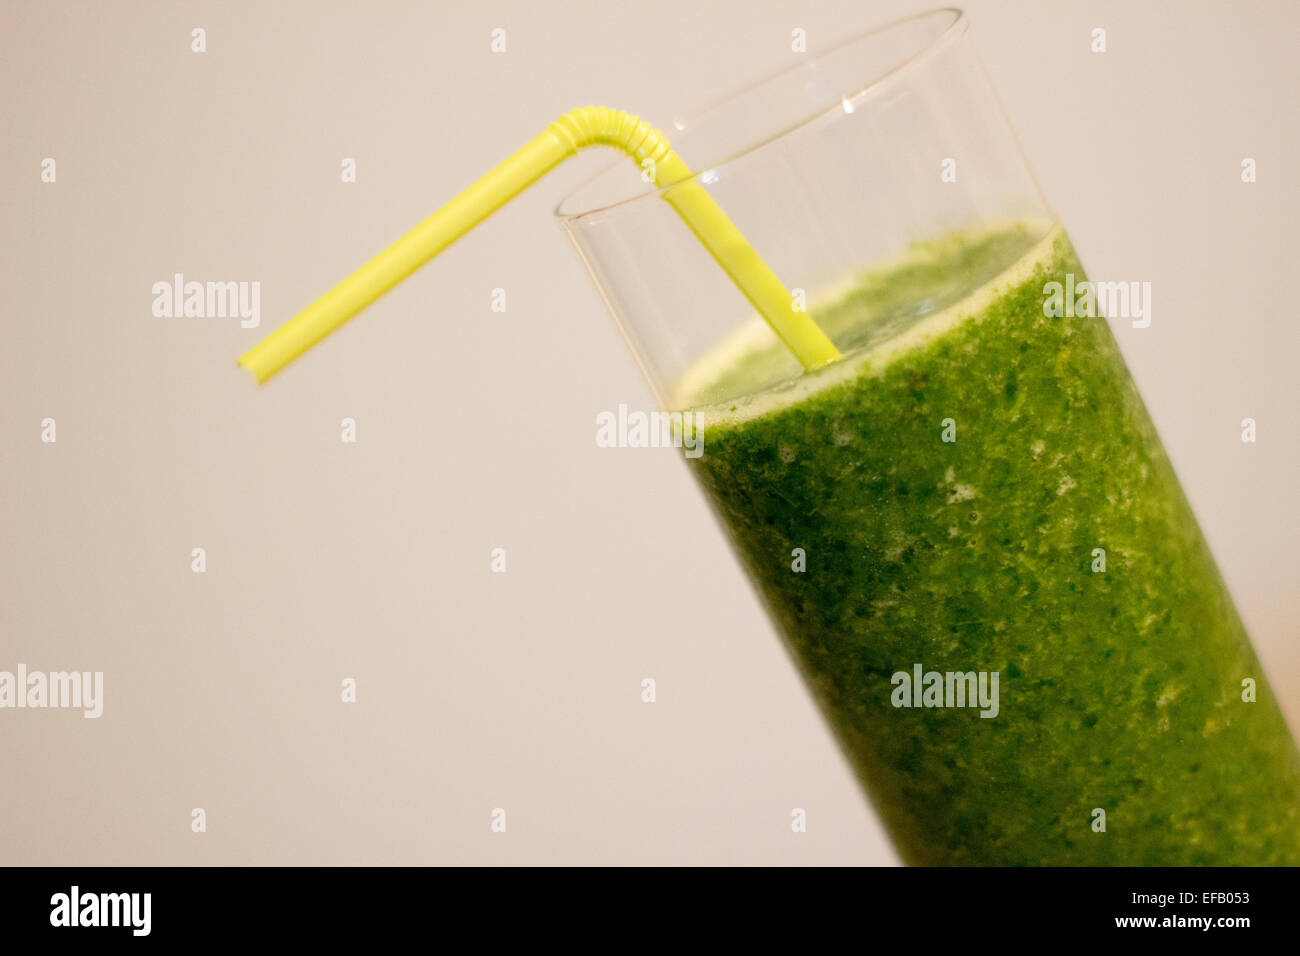 Green smoothie shot at an angle with light green straw Stock Photo